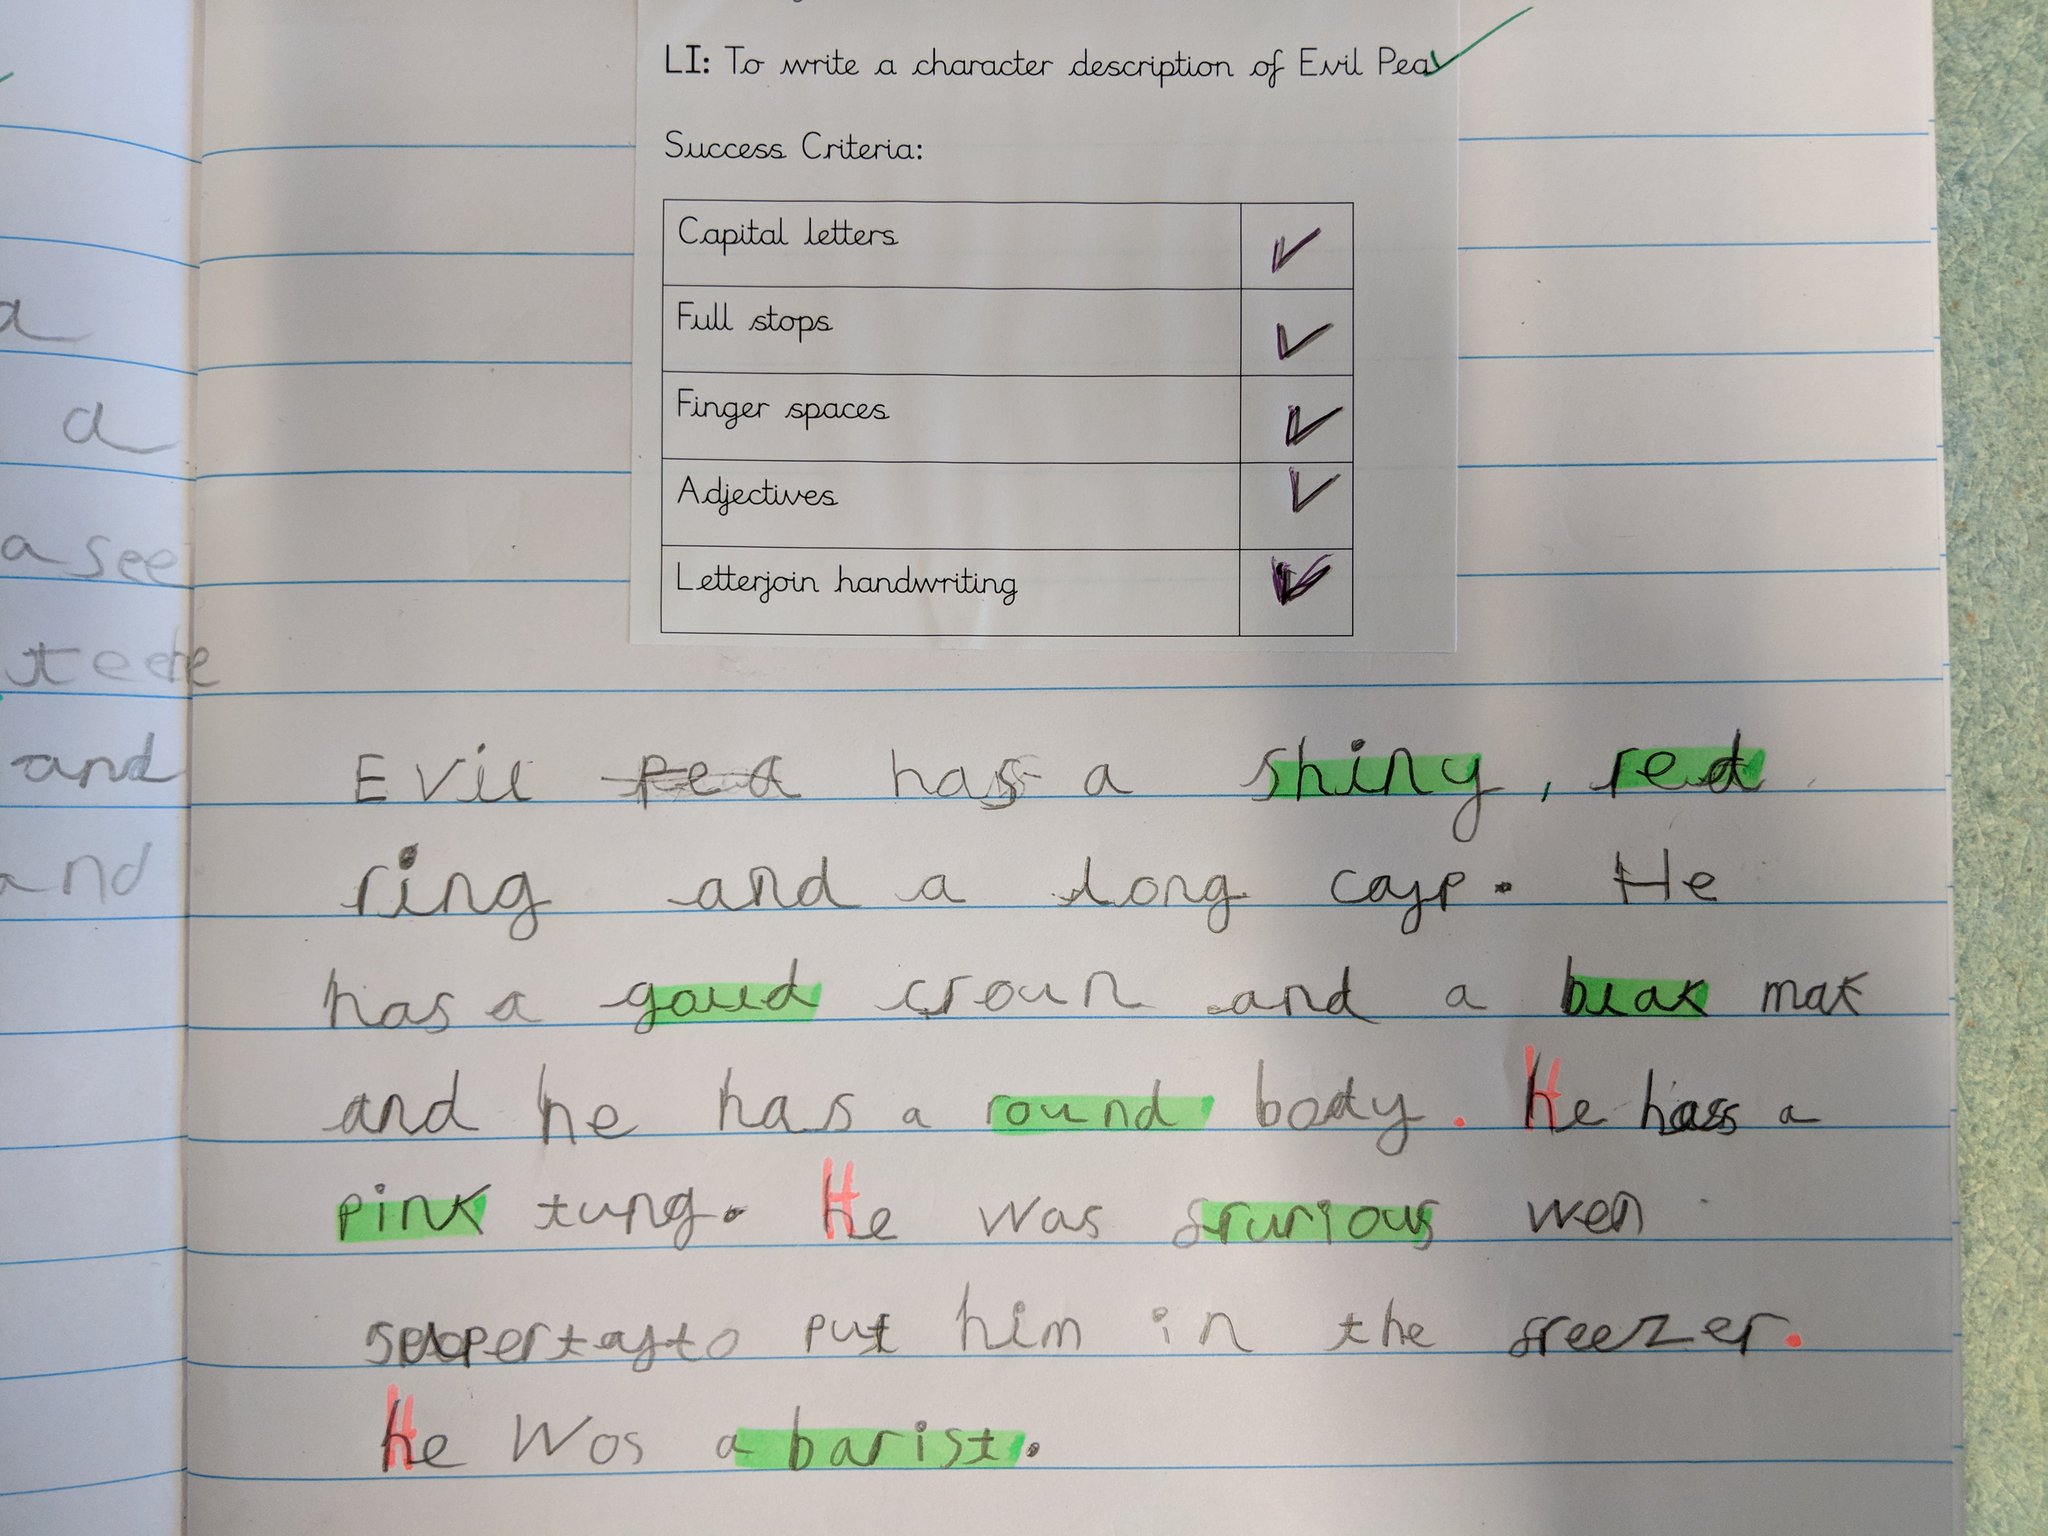 Steeton Primary on Twitter: "Character descriptions of the Evil